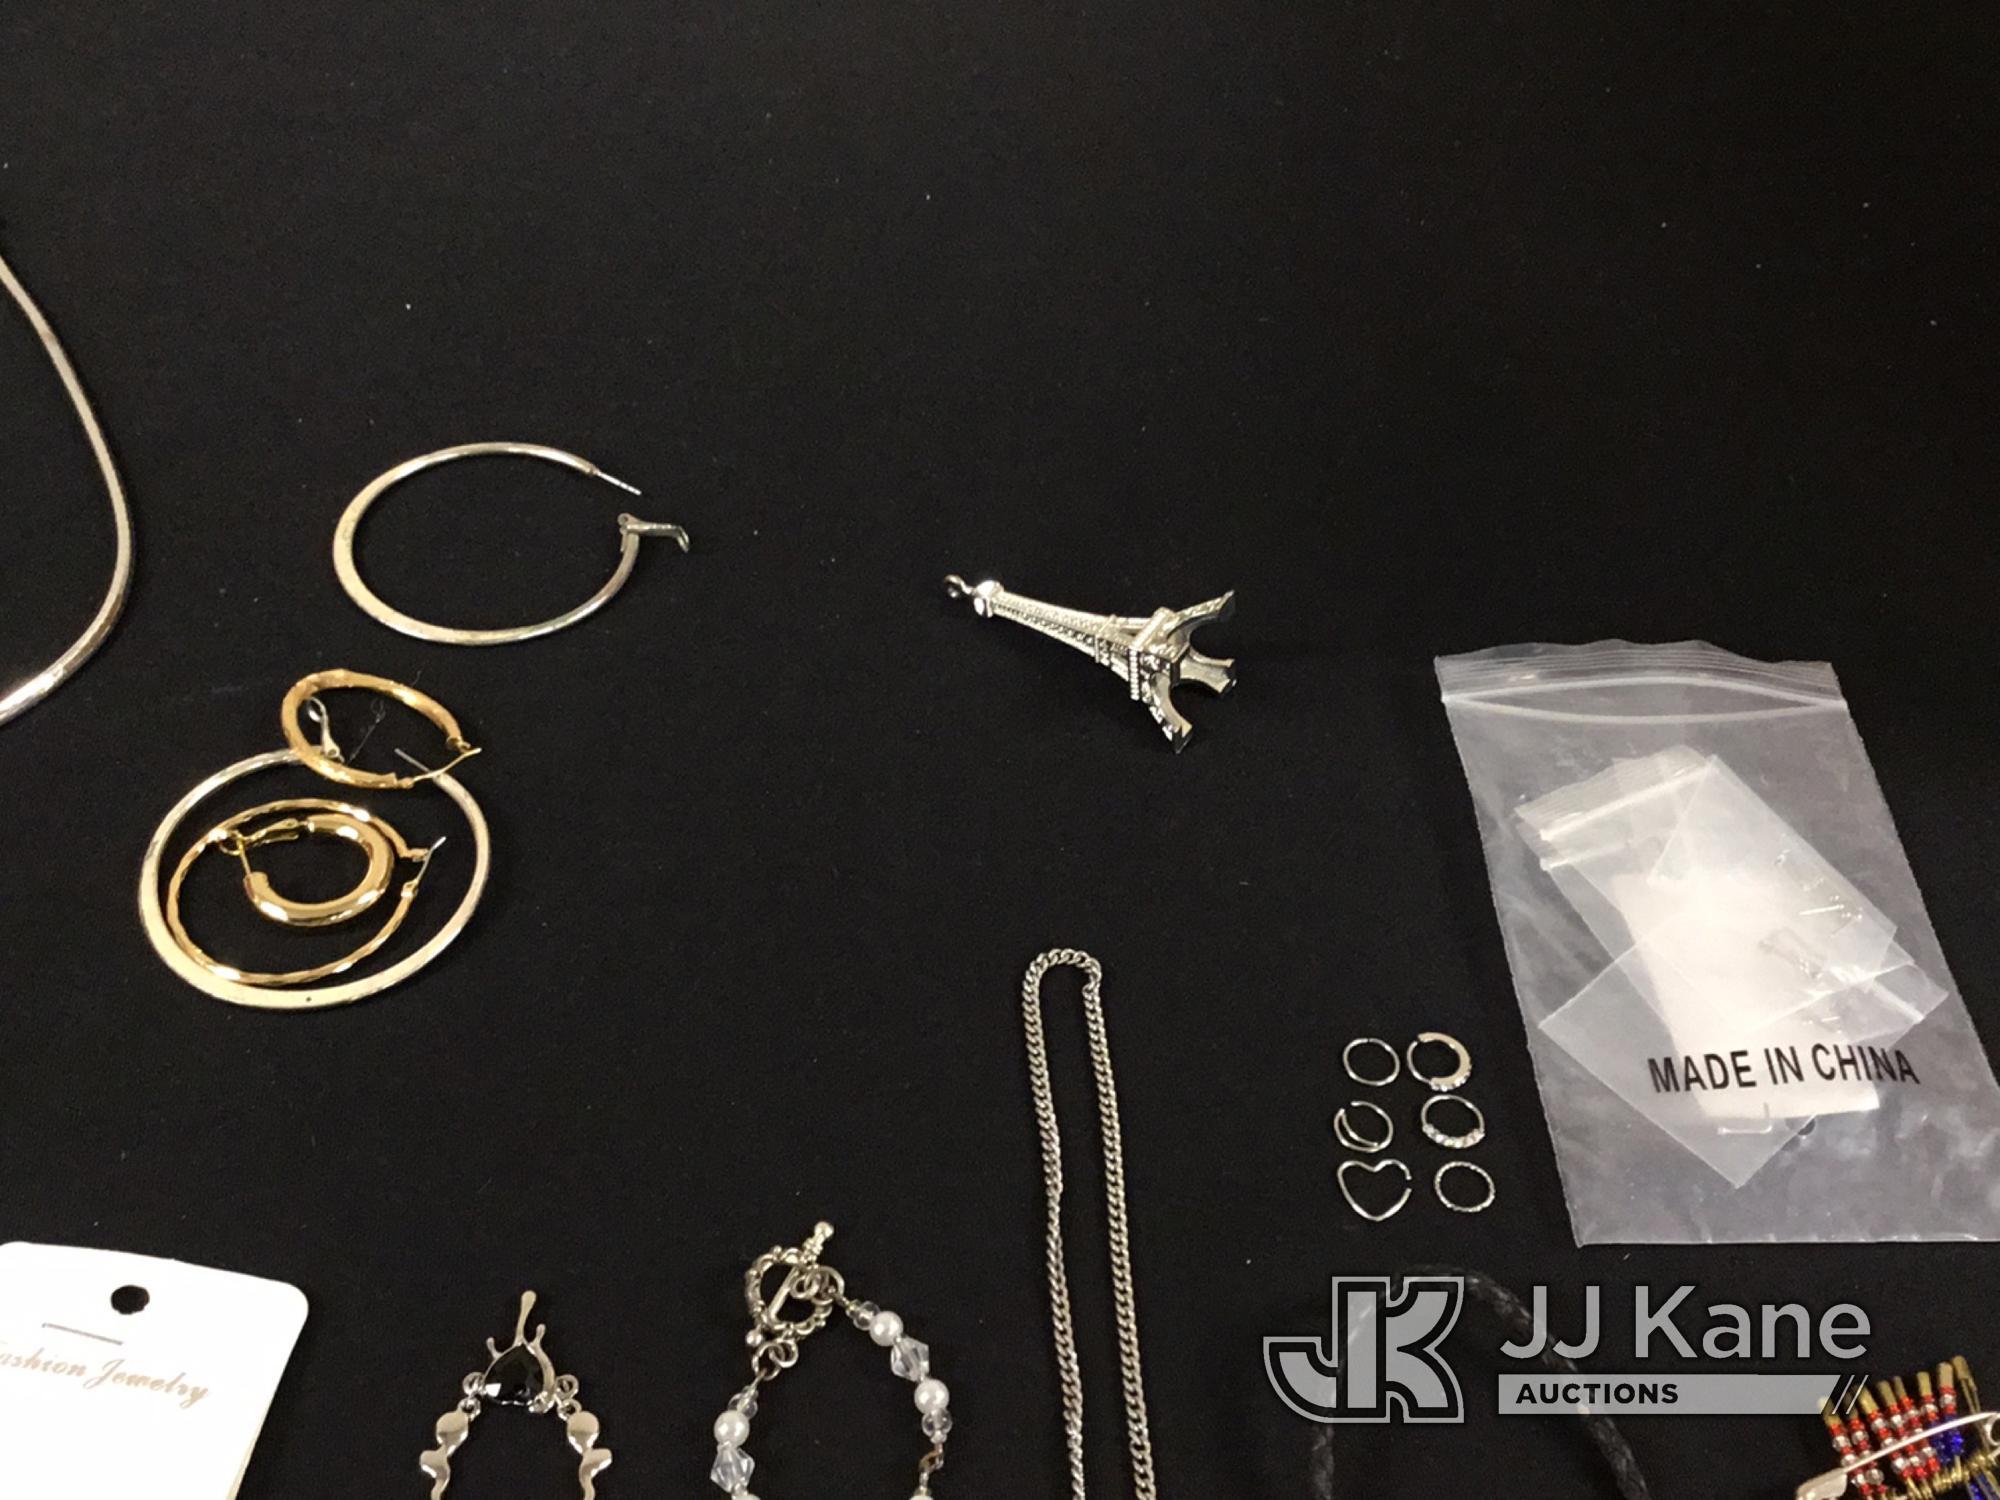 (Jurupa Valley, CA) Necklaces | earrings | possibly costume jewelry | authenticity unknown (Used ) N